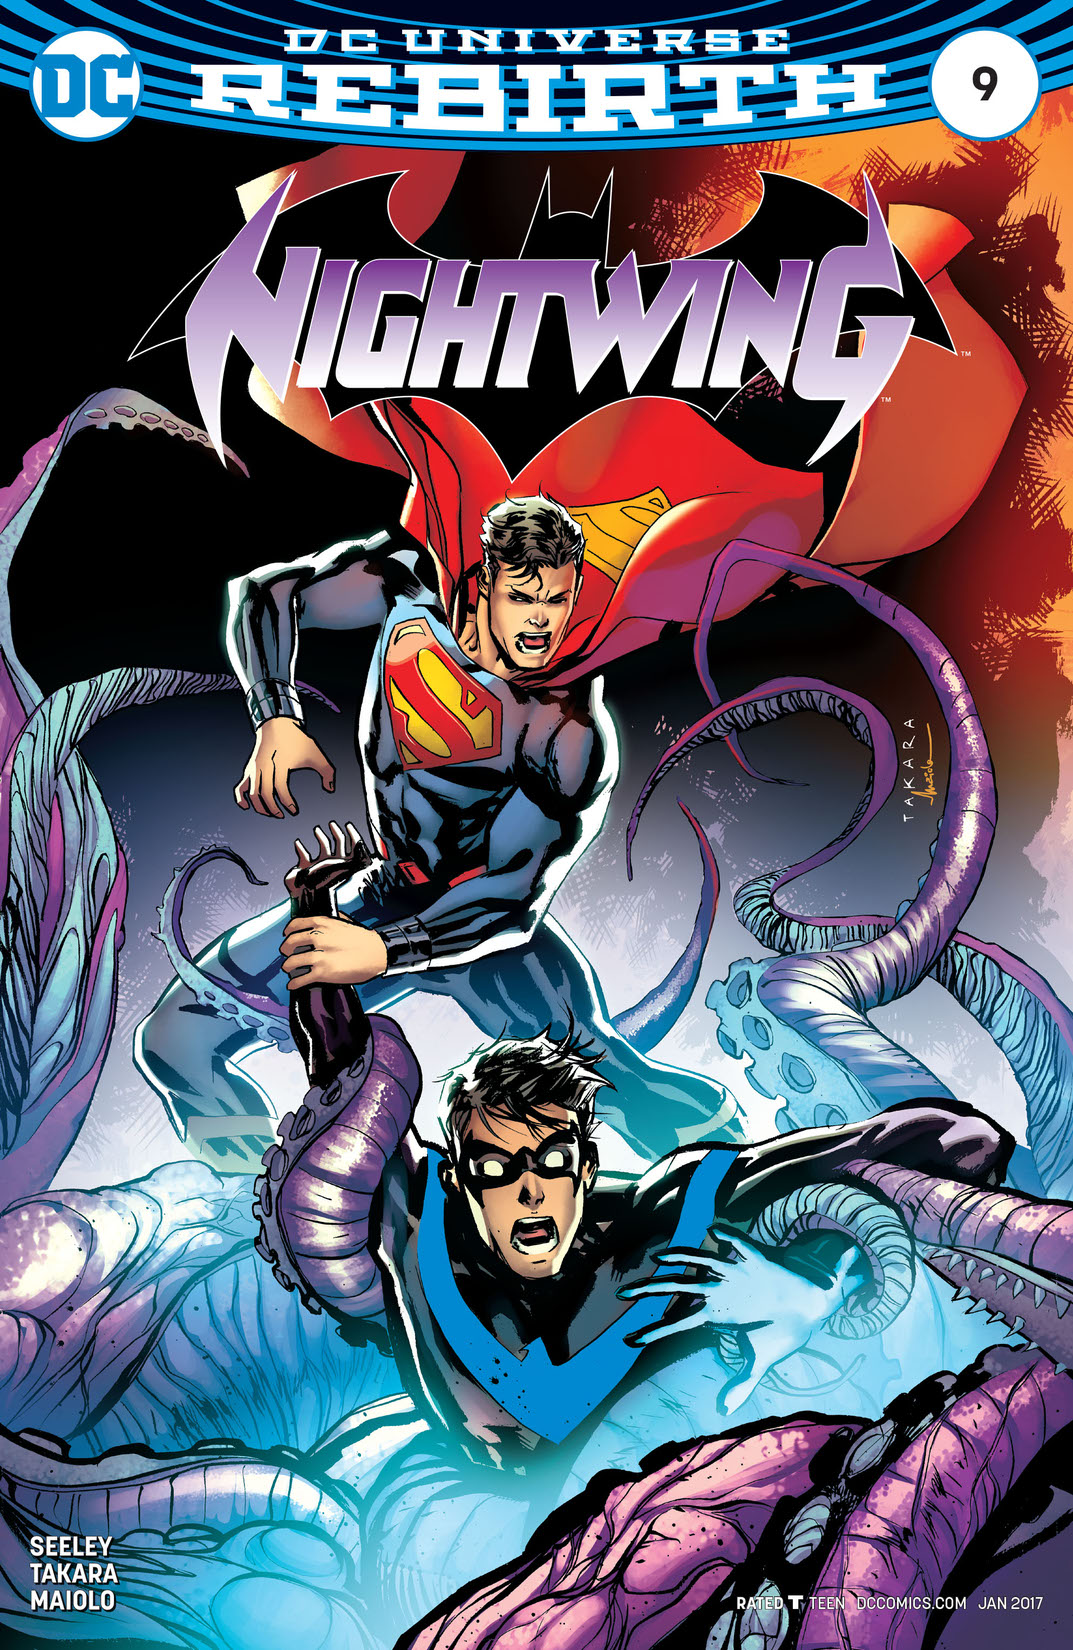 Nightwing (2016-) #9 preview images